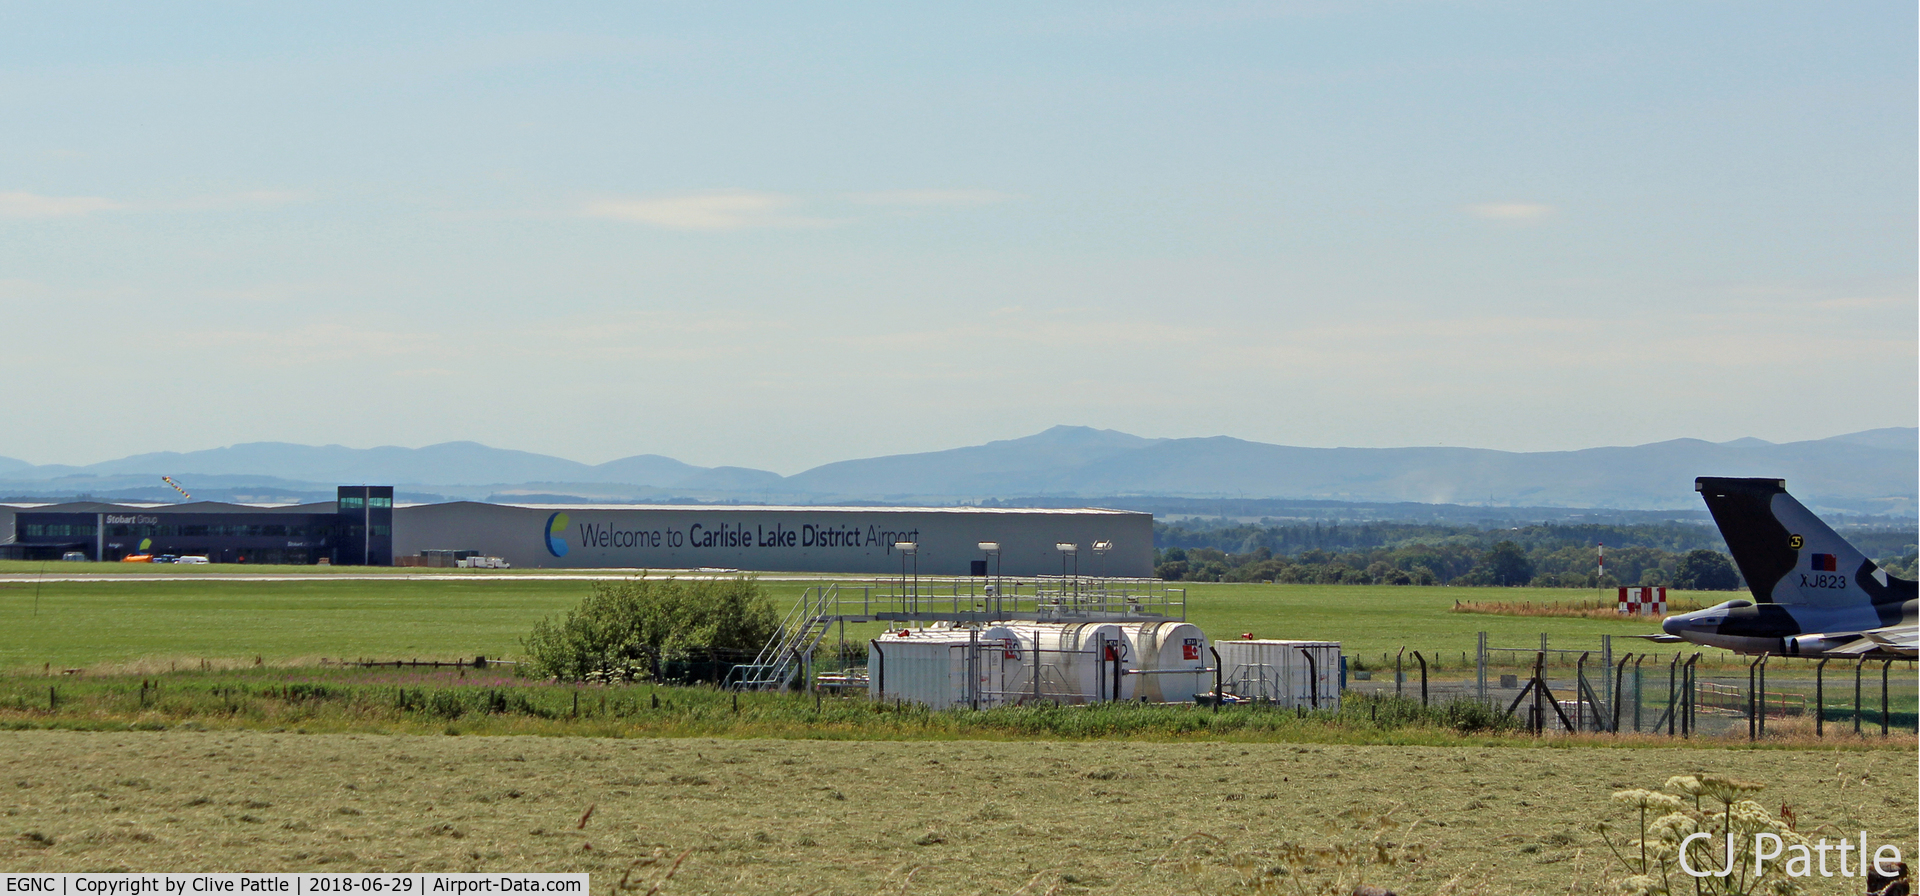 Carlisle Airport, Carlisle, England United Kingdom (EGNC) - A view of the new terminal and facilities at Carlisle, due to open in September 2018. Stobart Air to provide daily services to Belfast, Dublin and Southend using ATR-42 aircraft.